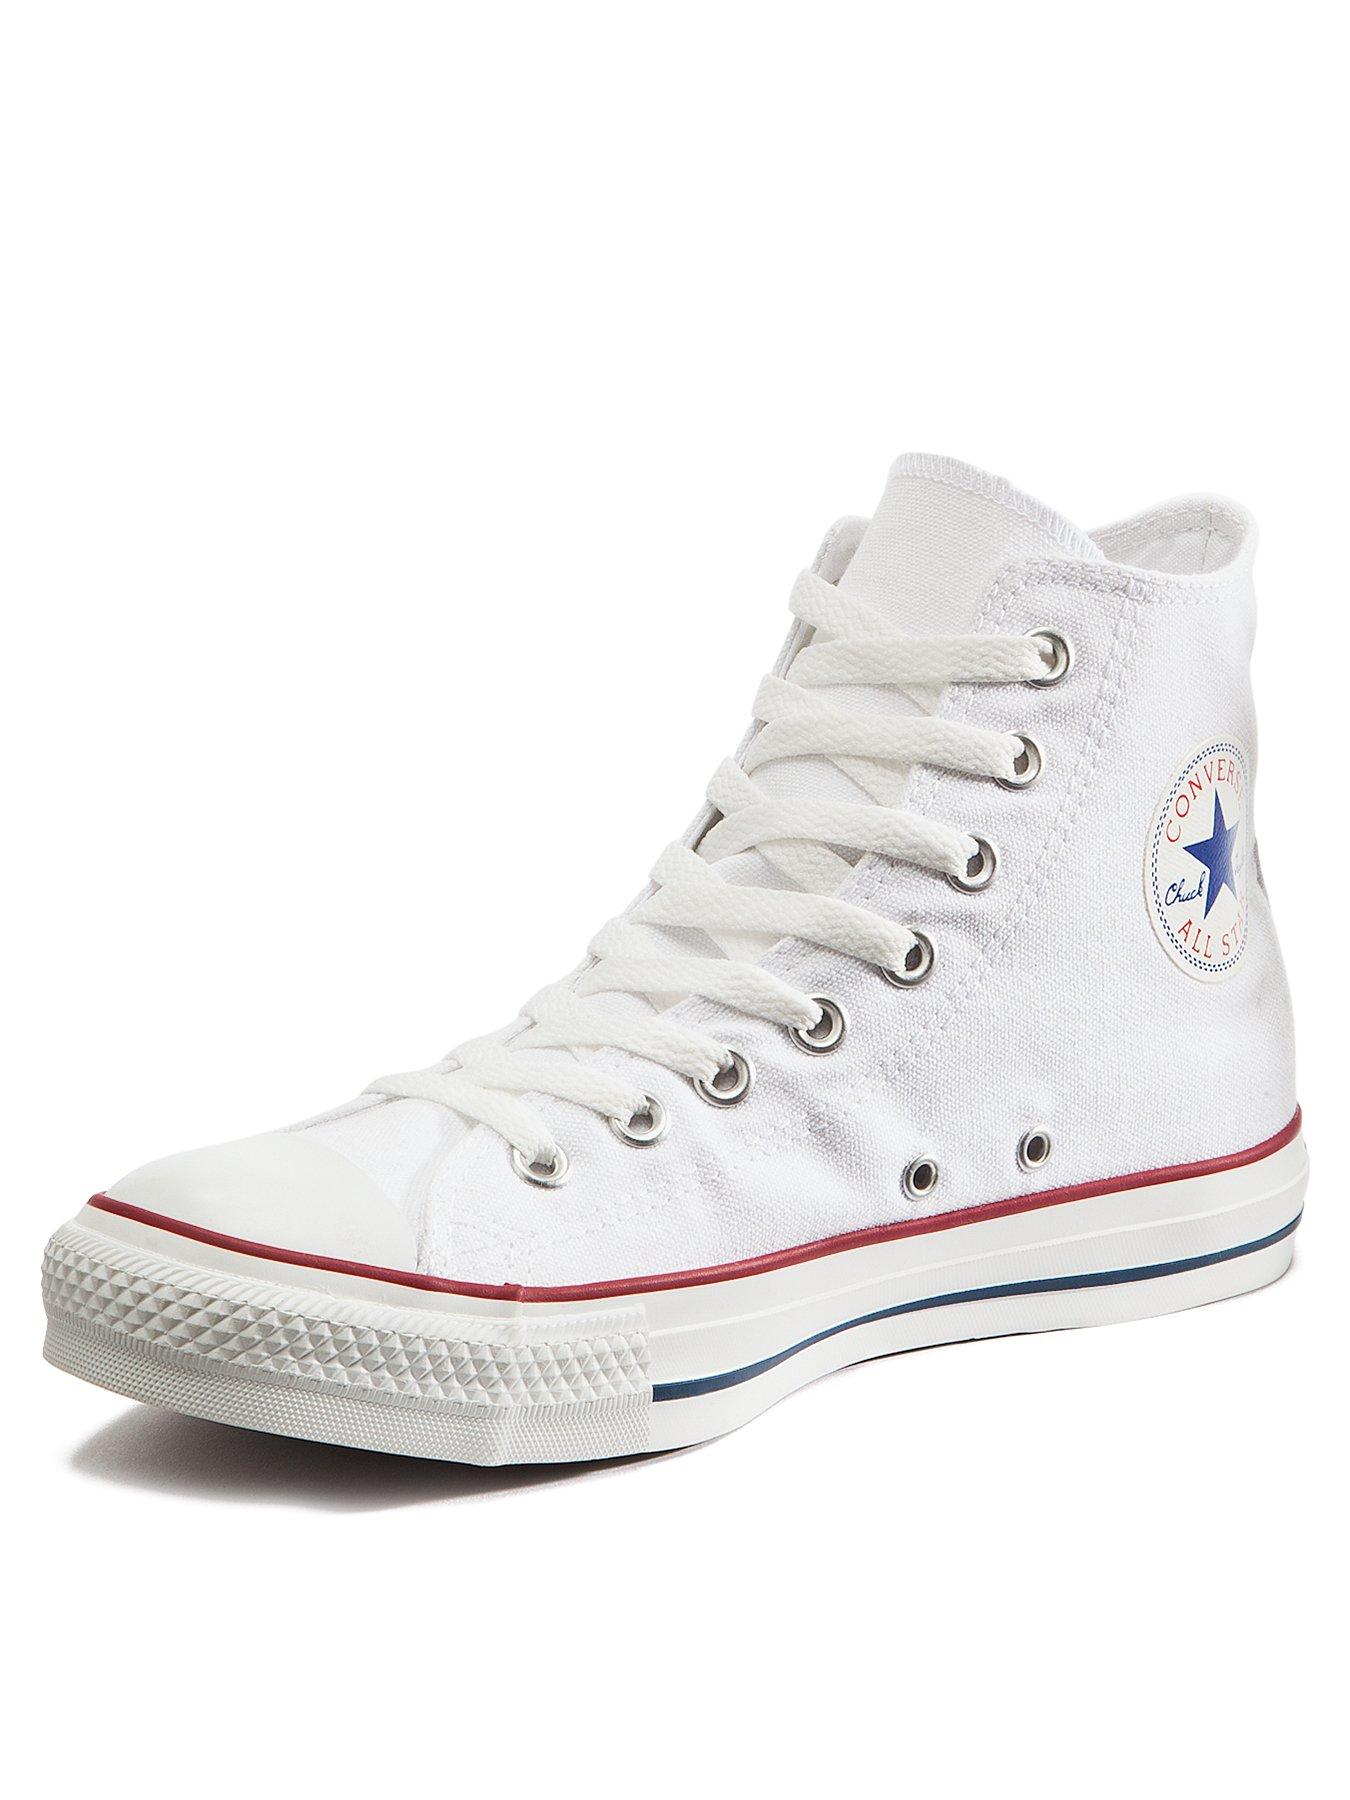 converse total white noise